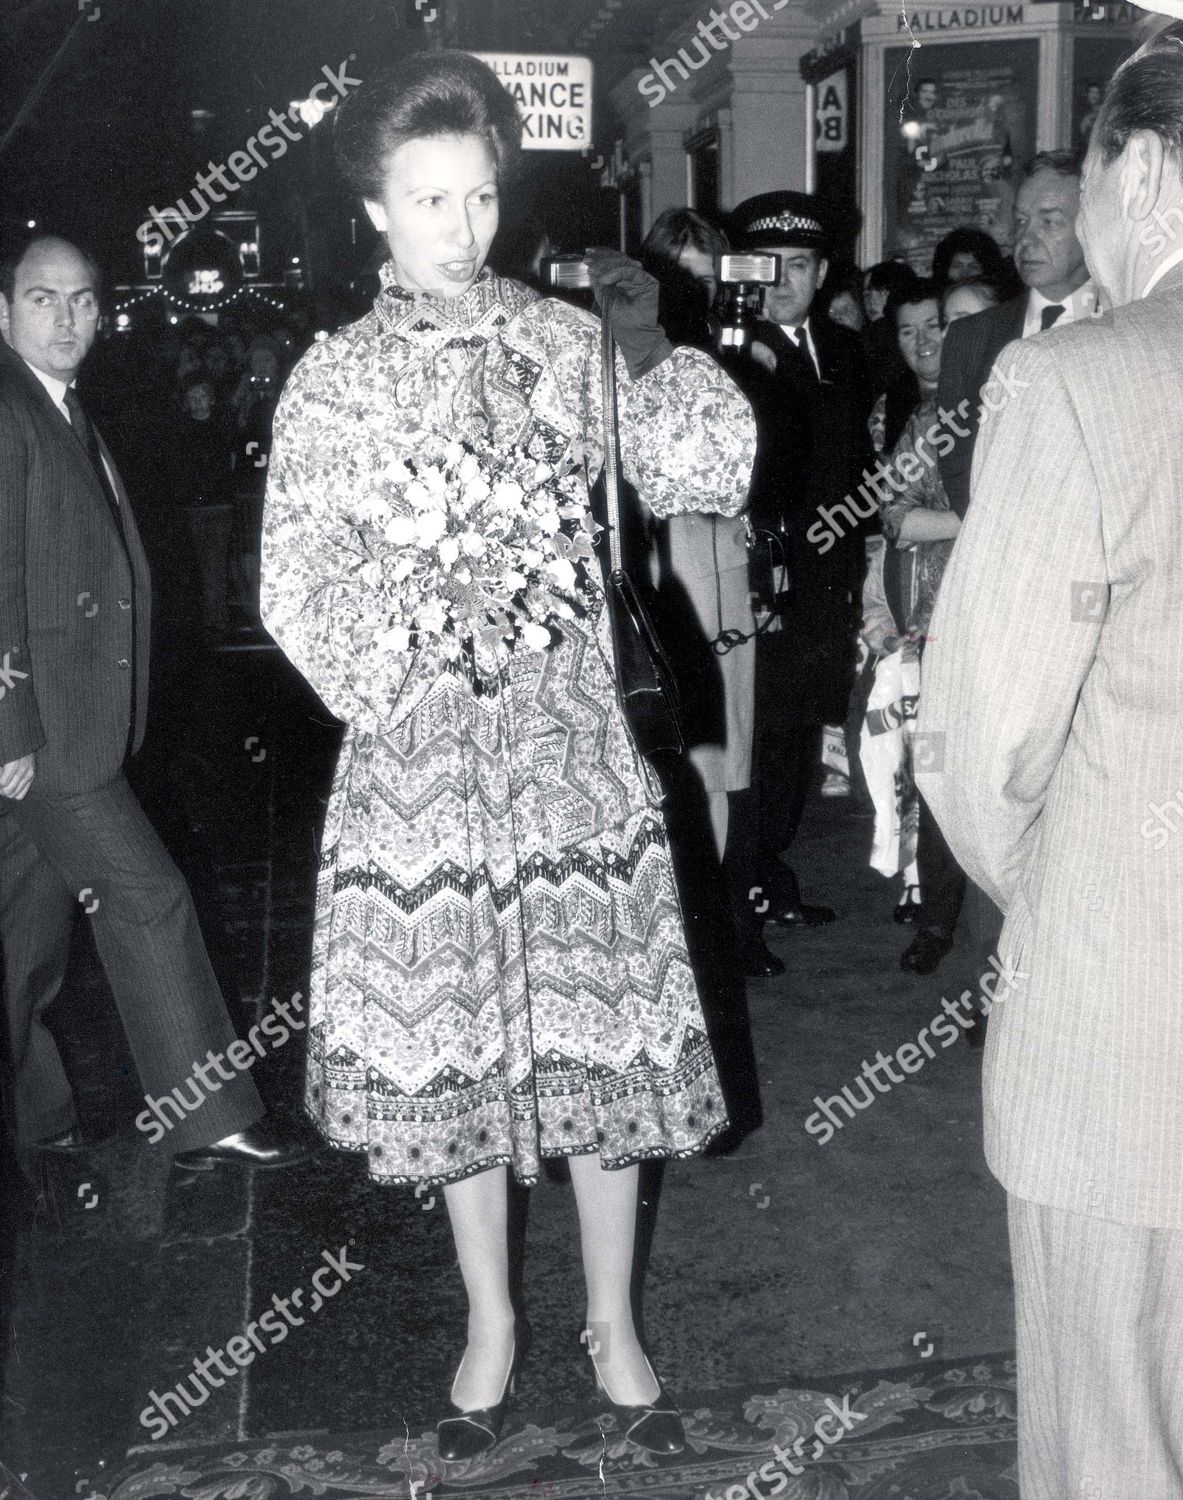 princess-royal-december-1985-princess-anne-leaves-palladium-after-seeing-cinderella-with-her-two-children-peter-and-zara-royalty-shutterstock-editorial-1044121a.jpg